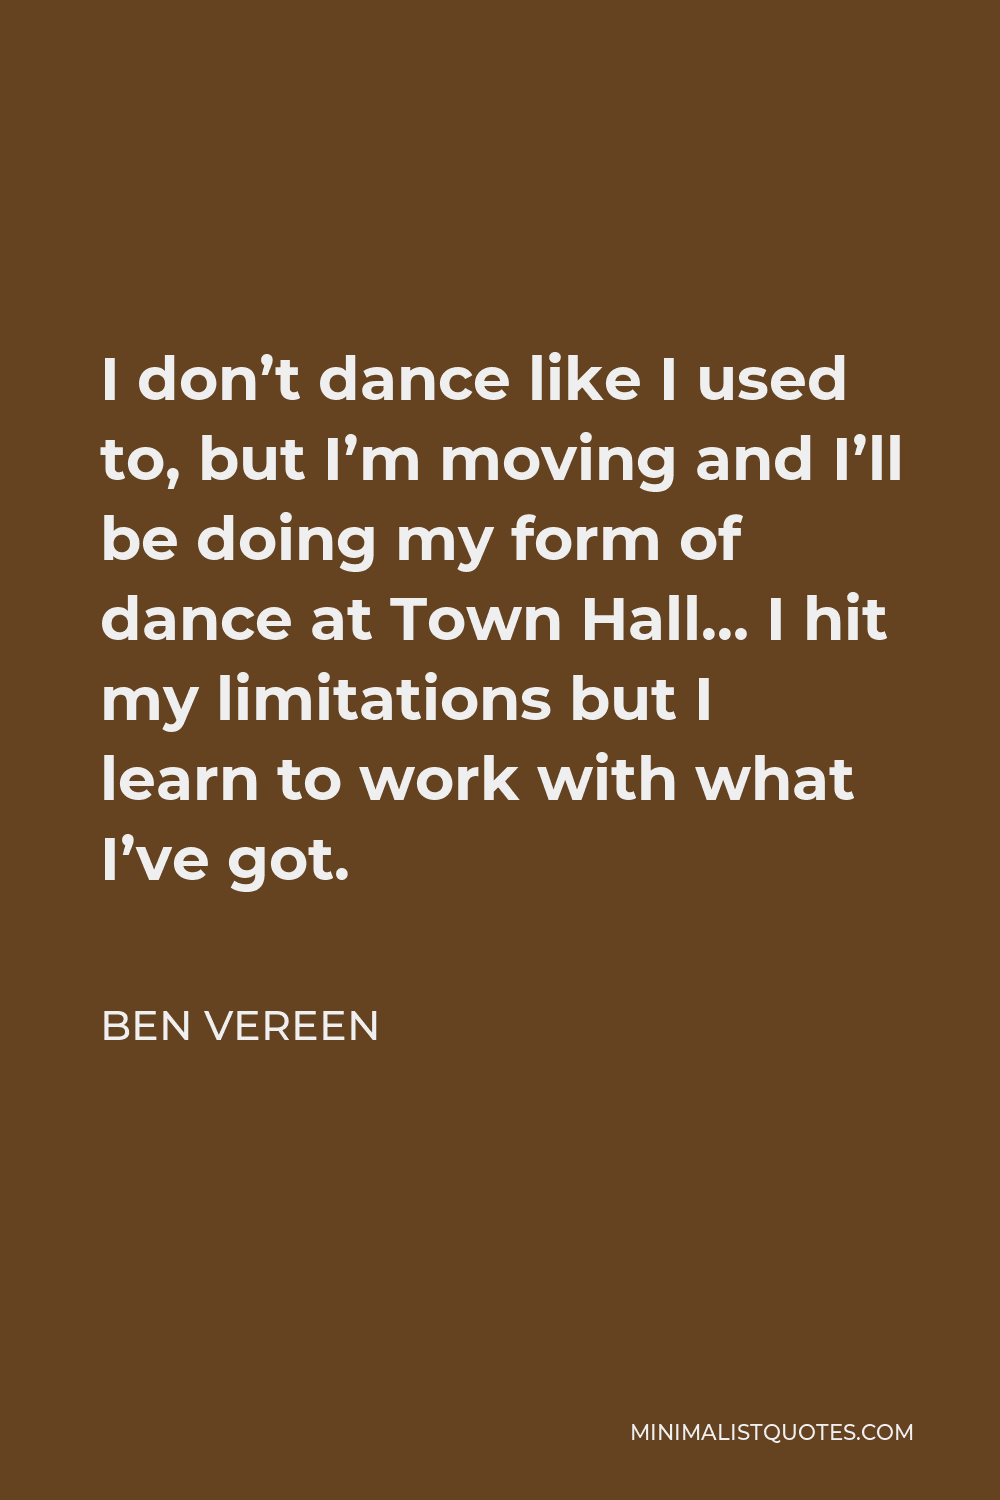 Ben Vereen Quote - I don’t dance like I used to, but I’m moving and I’ll be doing my form of dance at Town Hall… I hit my limitations but I learn to work with what I’ve got.